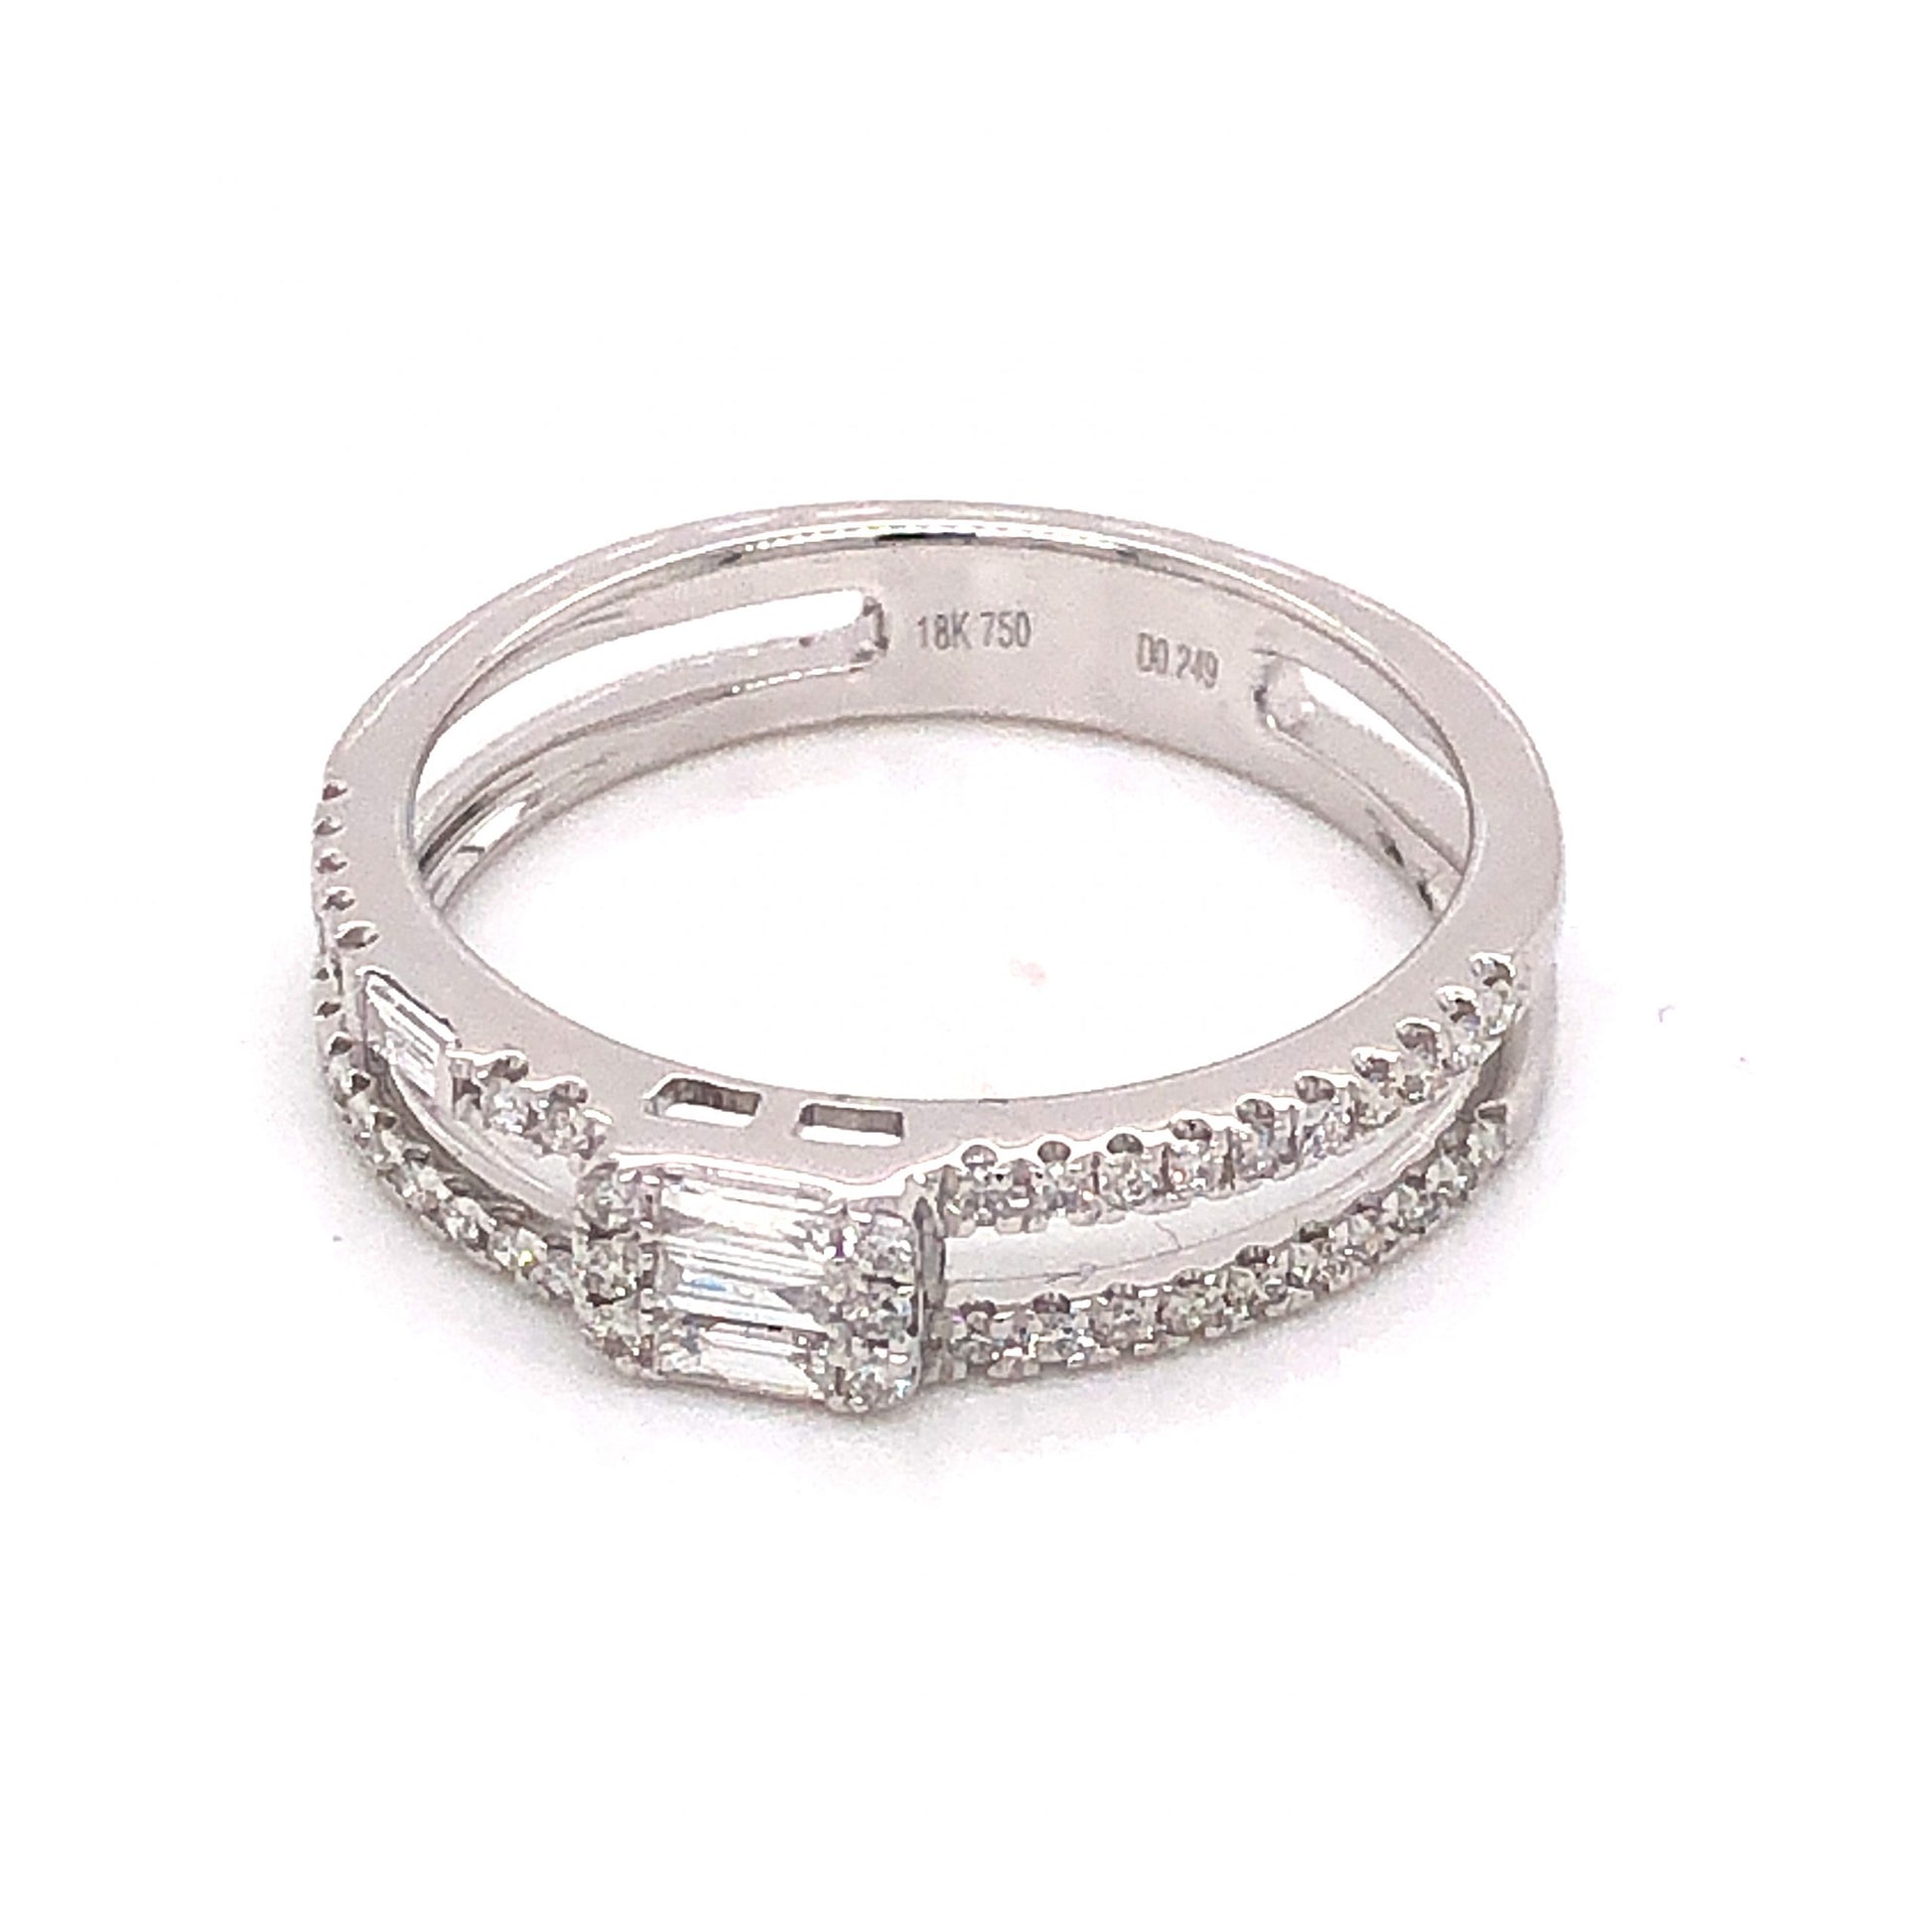 .27 Double Banded Diamond Stacking Ring in 18K White GoldComposition: 18 Karat White Gold Ring Size: 6.75 Total Diamond Weight: .27ct Total Gram Weight: 3.0 g Inscription: 18k, 750, D0.249
      